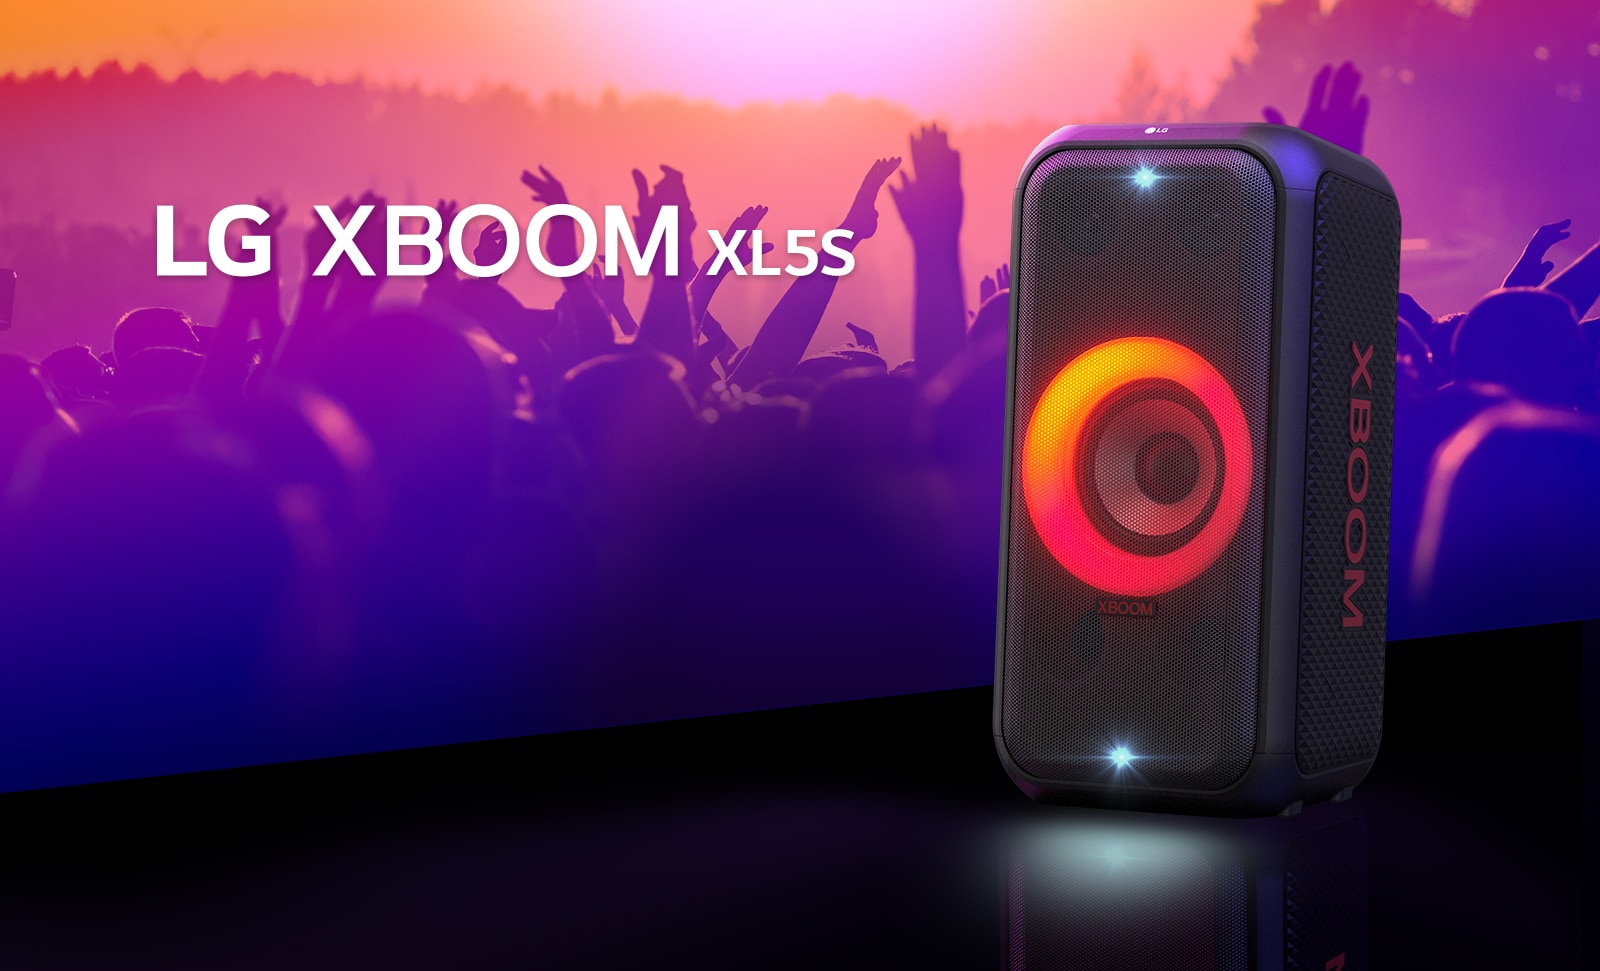 LG XBOOM XL5S is placed on the stage with red-orange gradient lighting is on. Behind the stage, people enjoy the music.